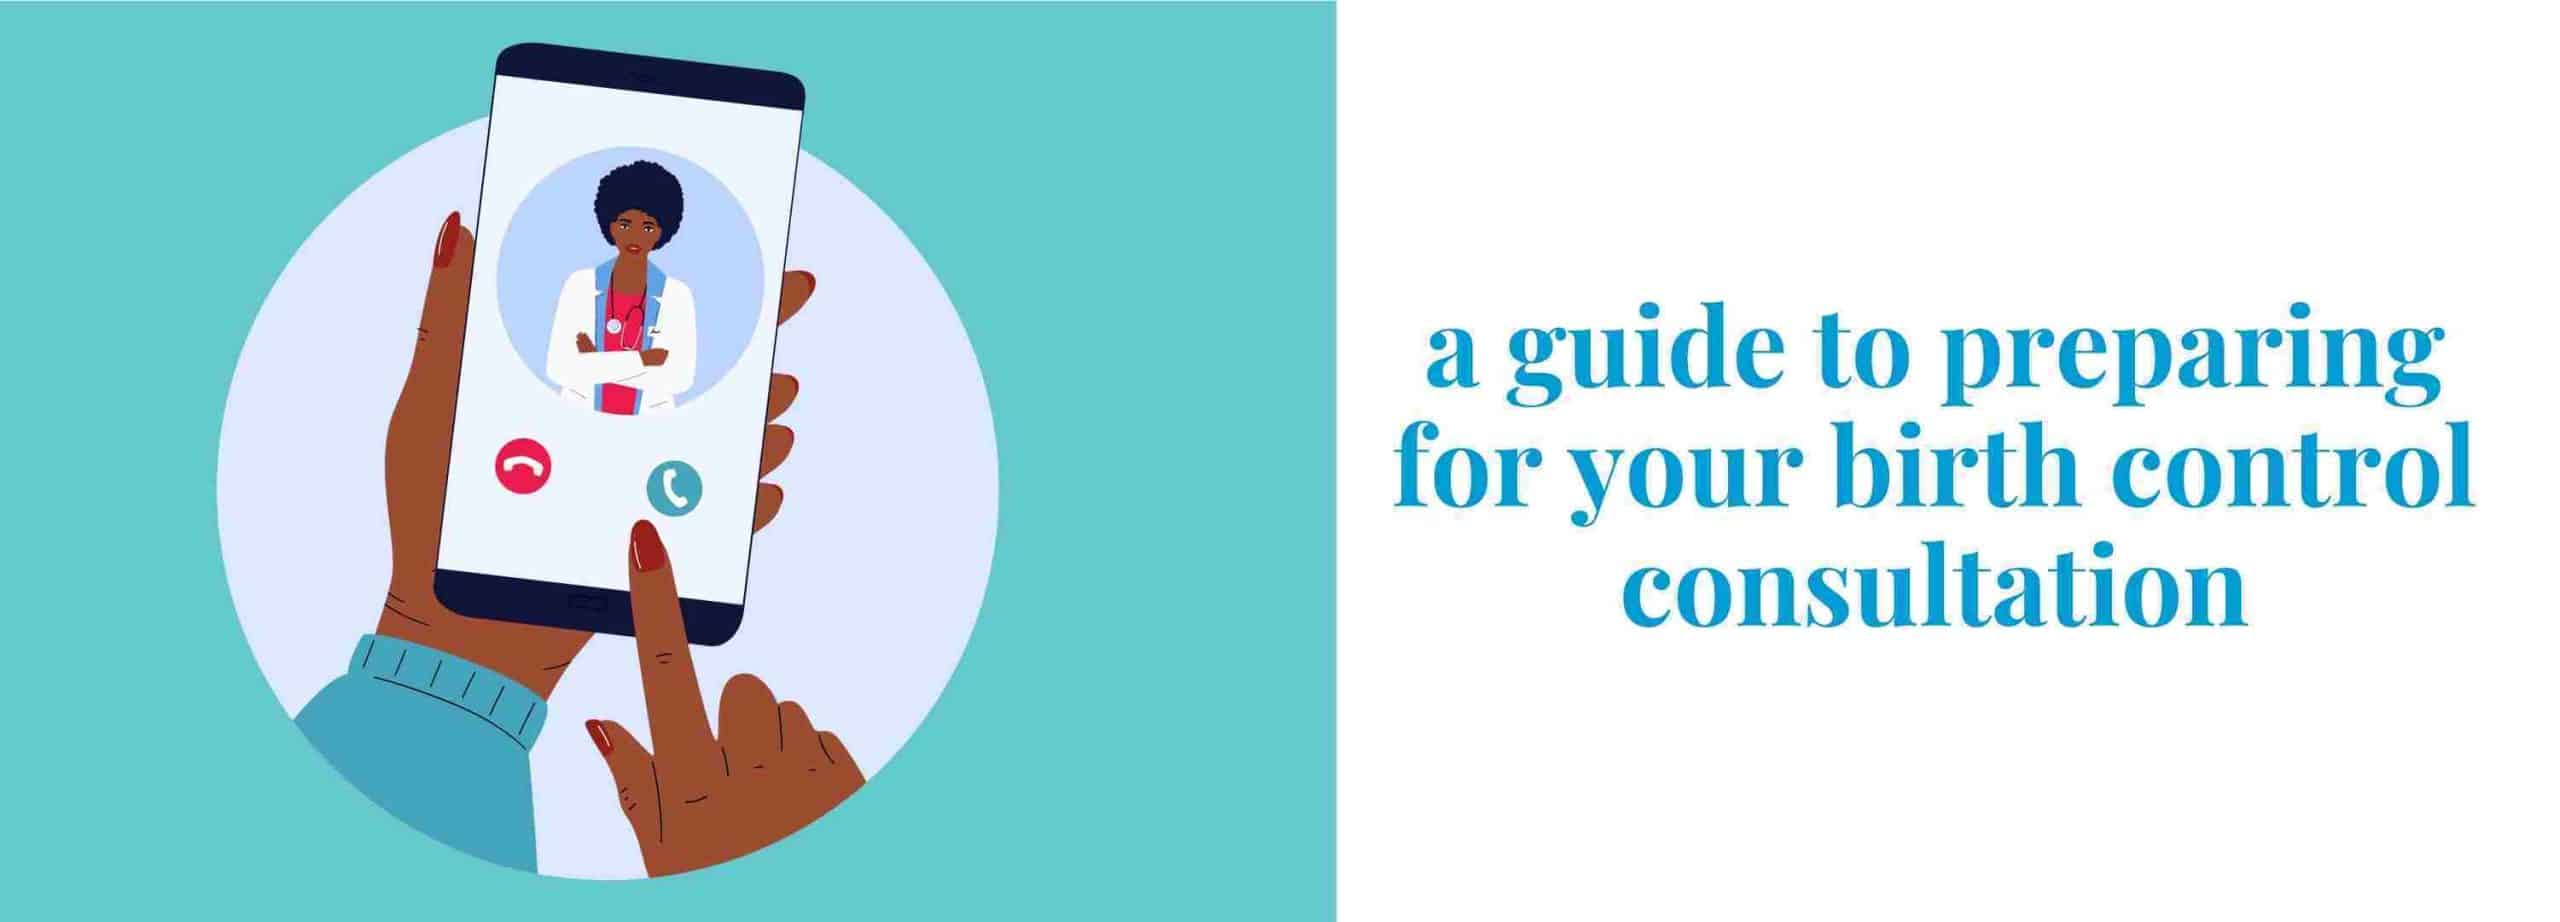 guide to preparing four your birth control consultation